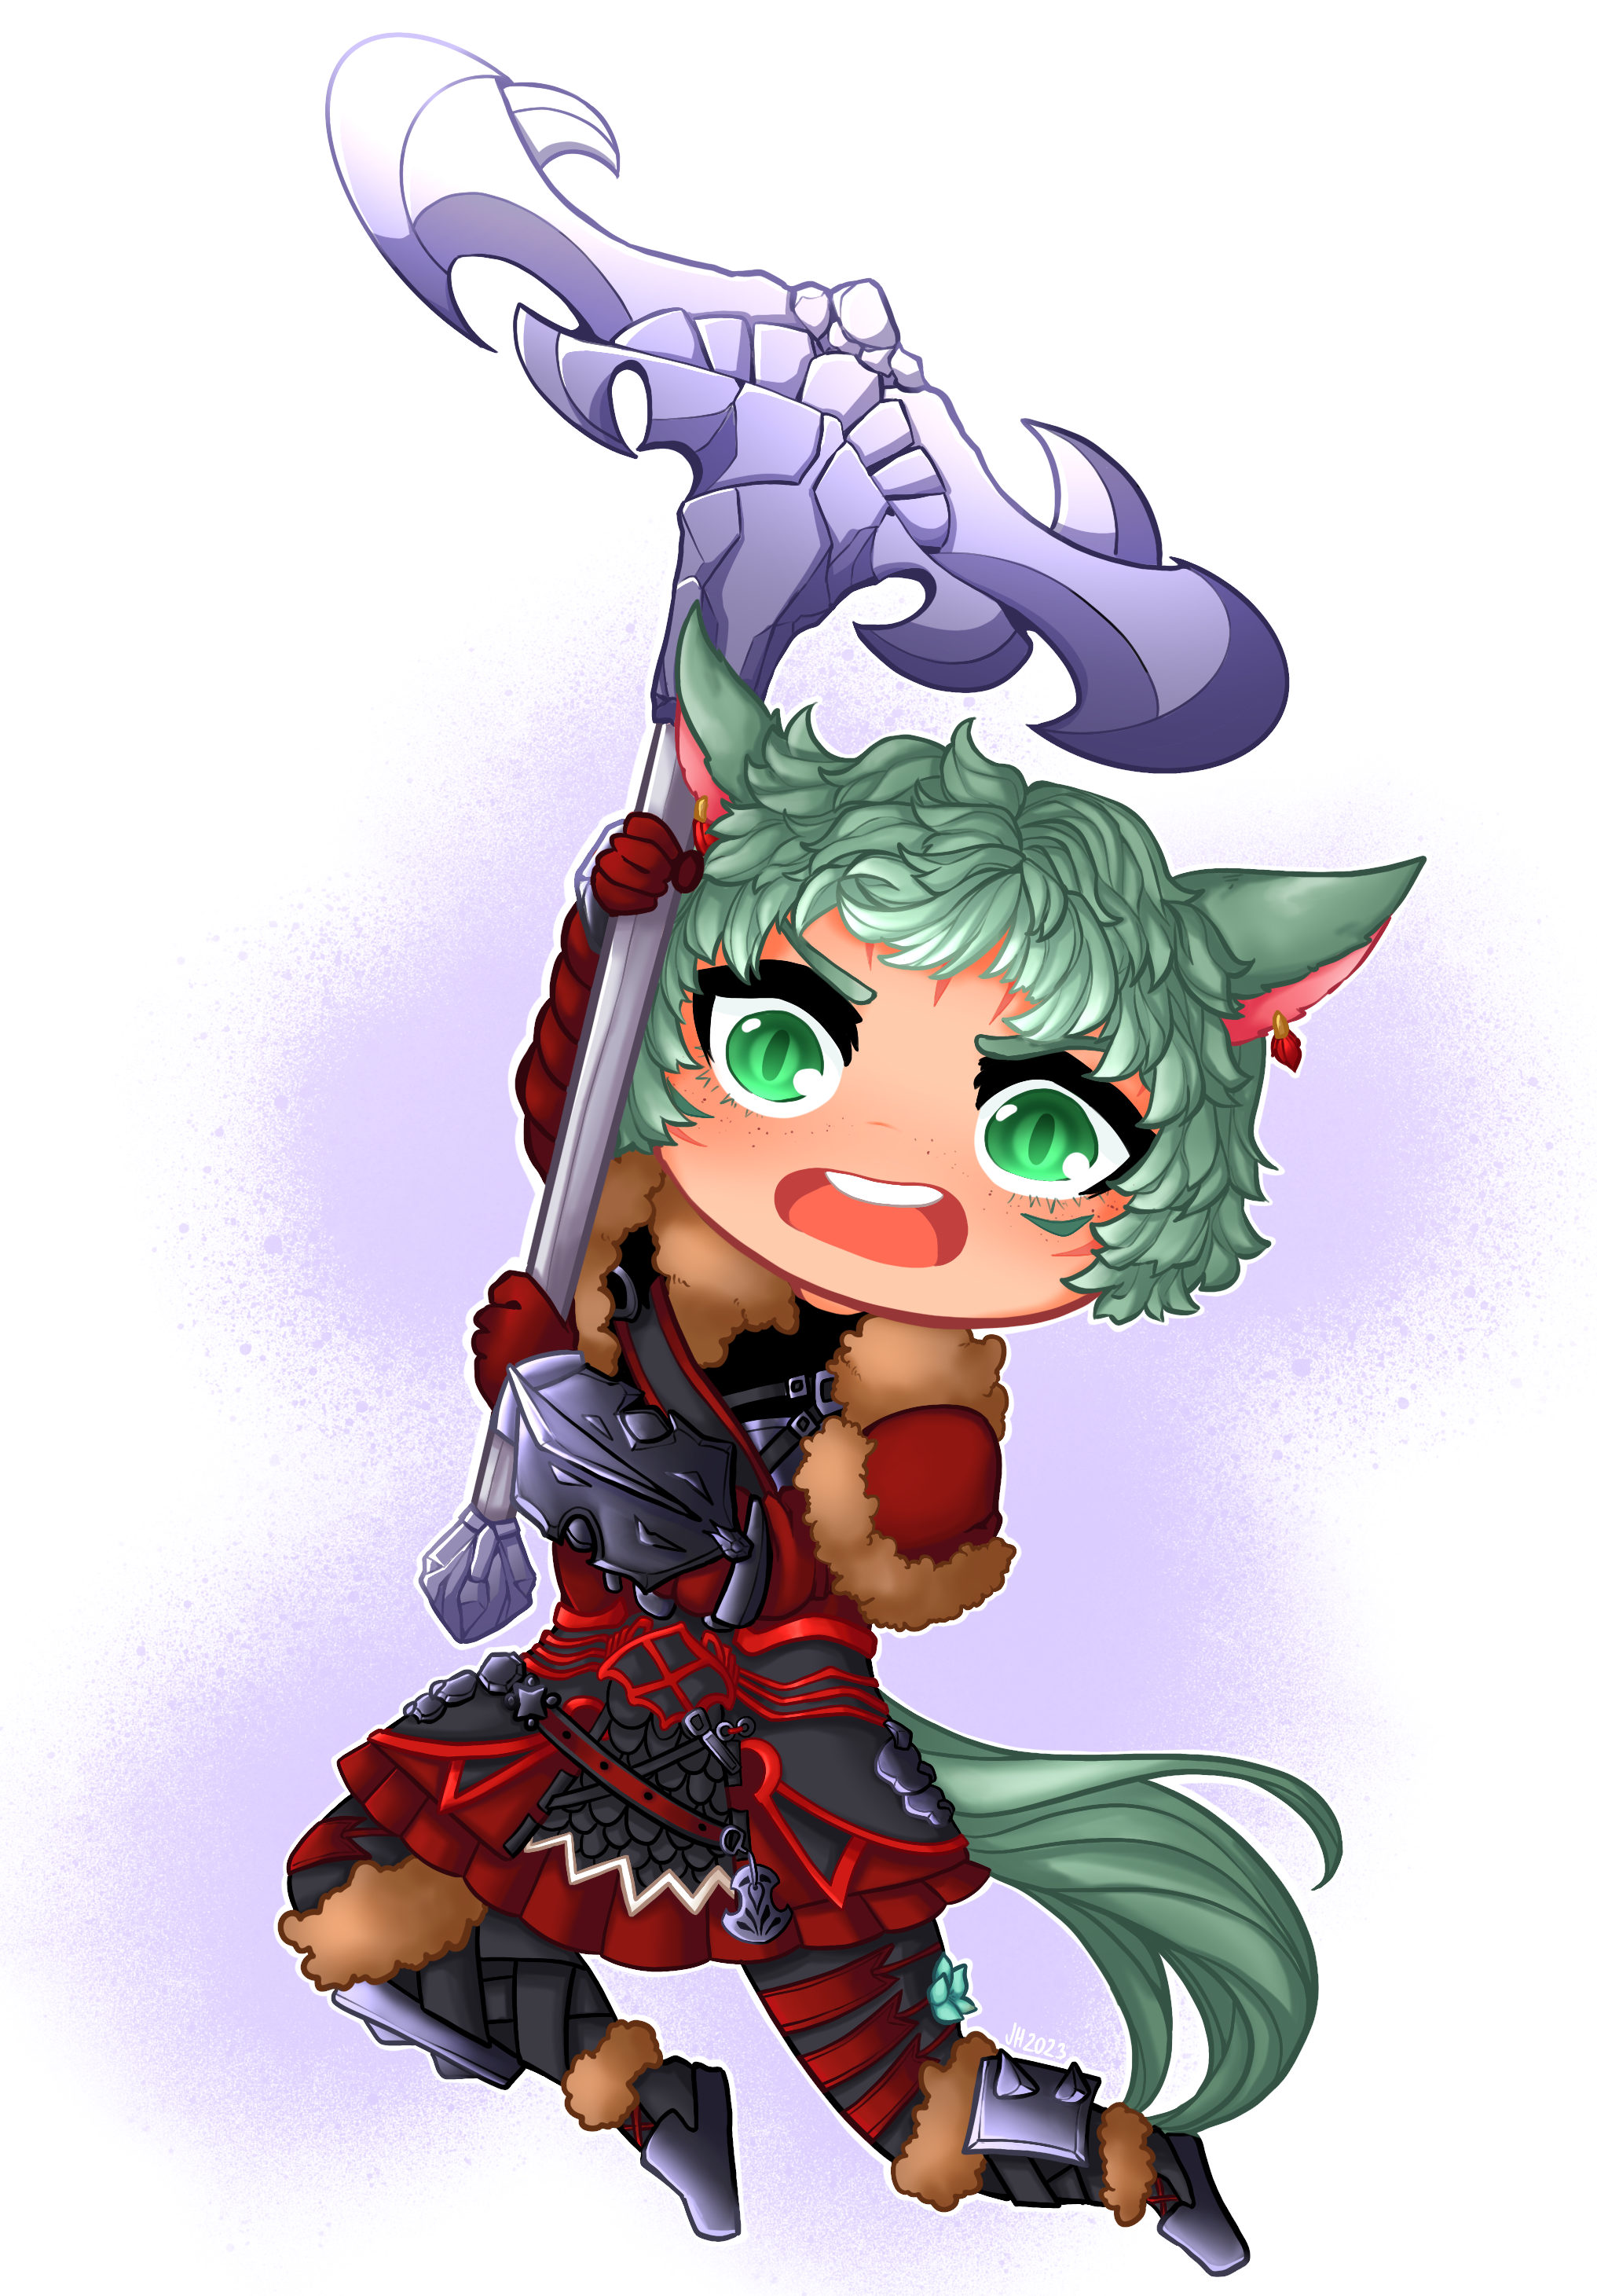 A chibi drawing of my WoL Moss'itro Dorks jumping down with a giant ax in her hands